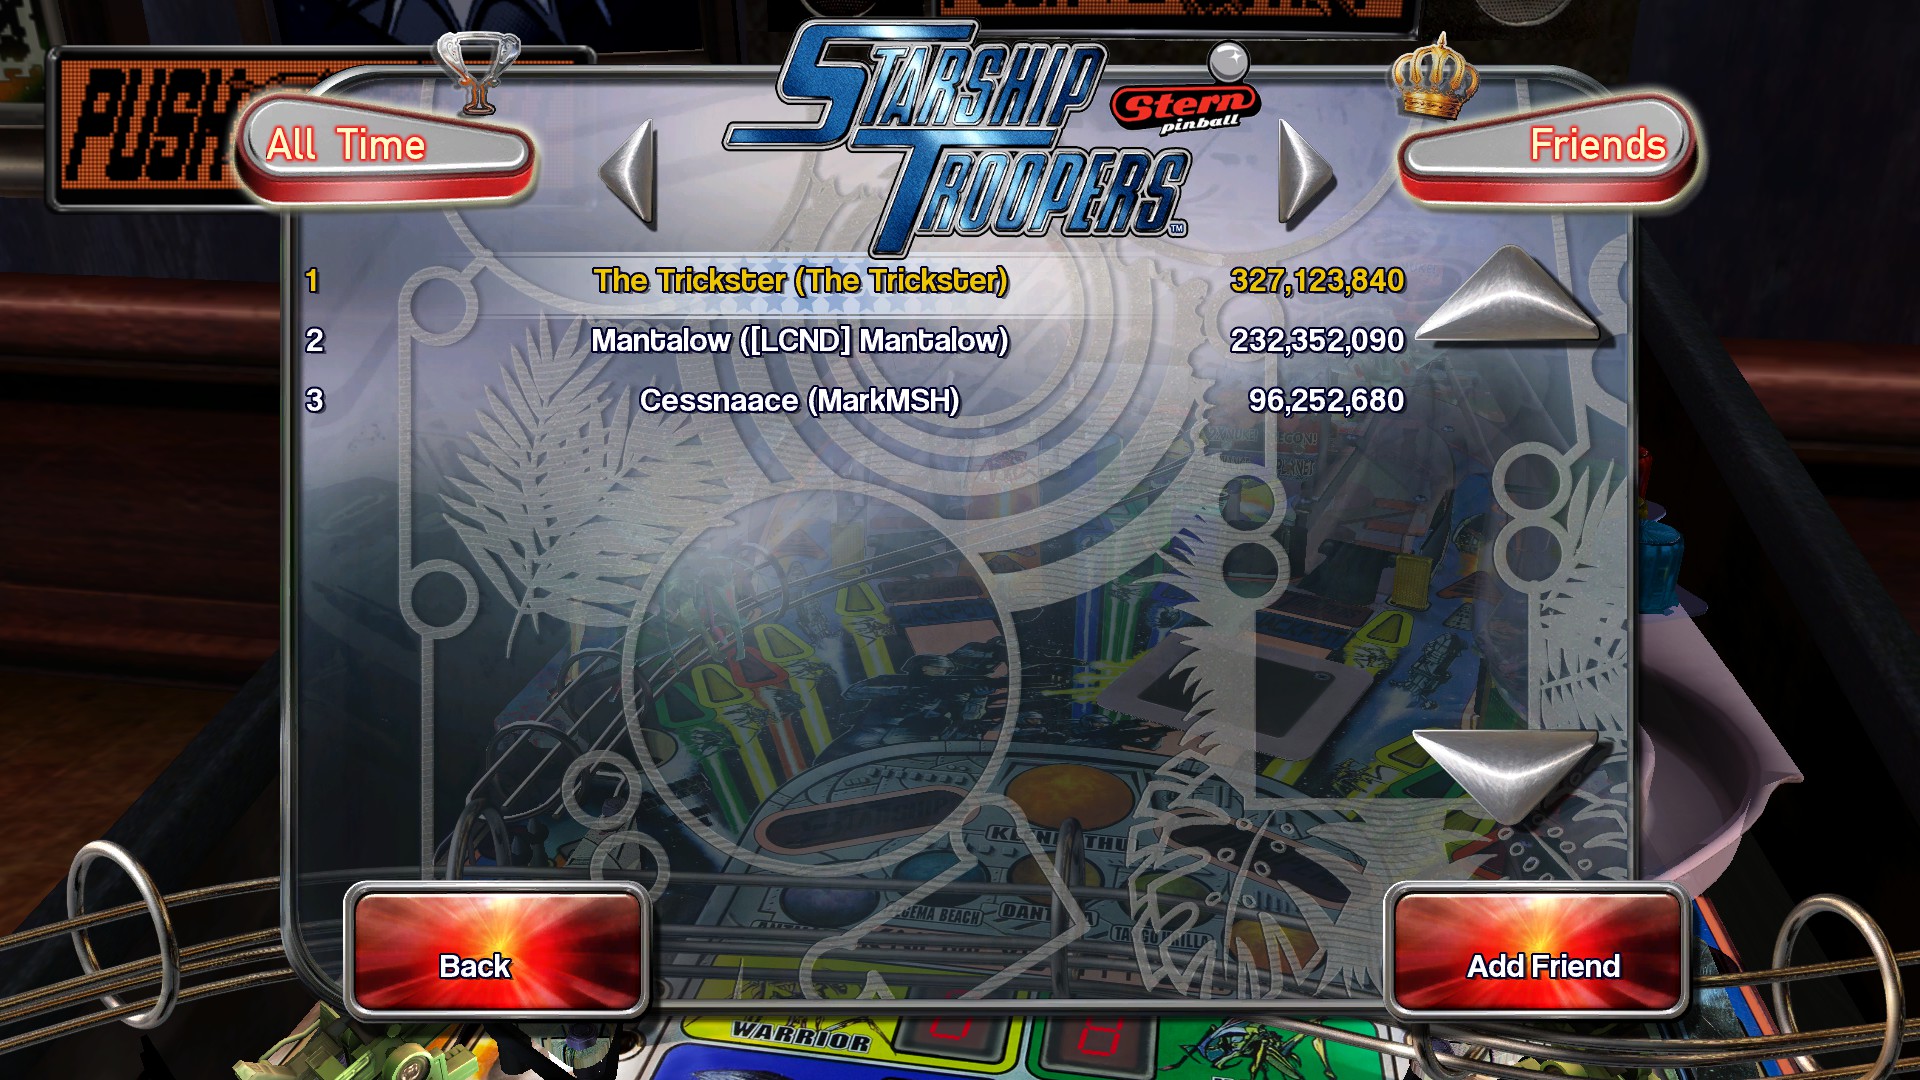 TheTrickster: Pinball Arcade: Starship Troopers (PC) 327,123,840 points on 2016-03-02 04:13:01